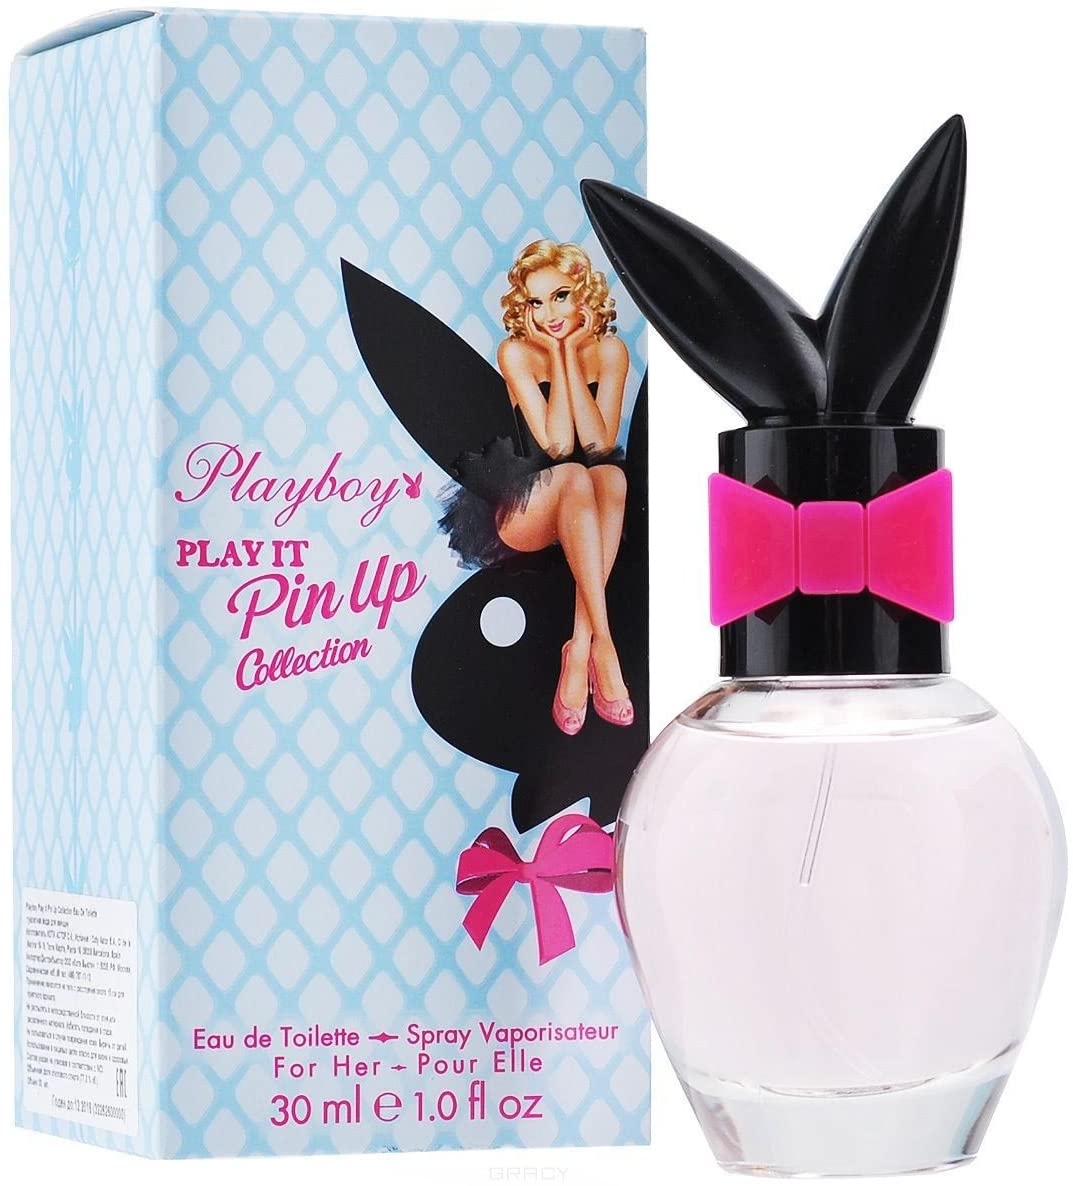 Playboy Play It Pin Up Collection, edt 30ml